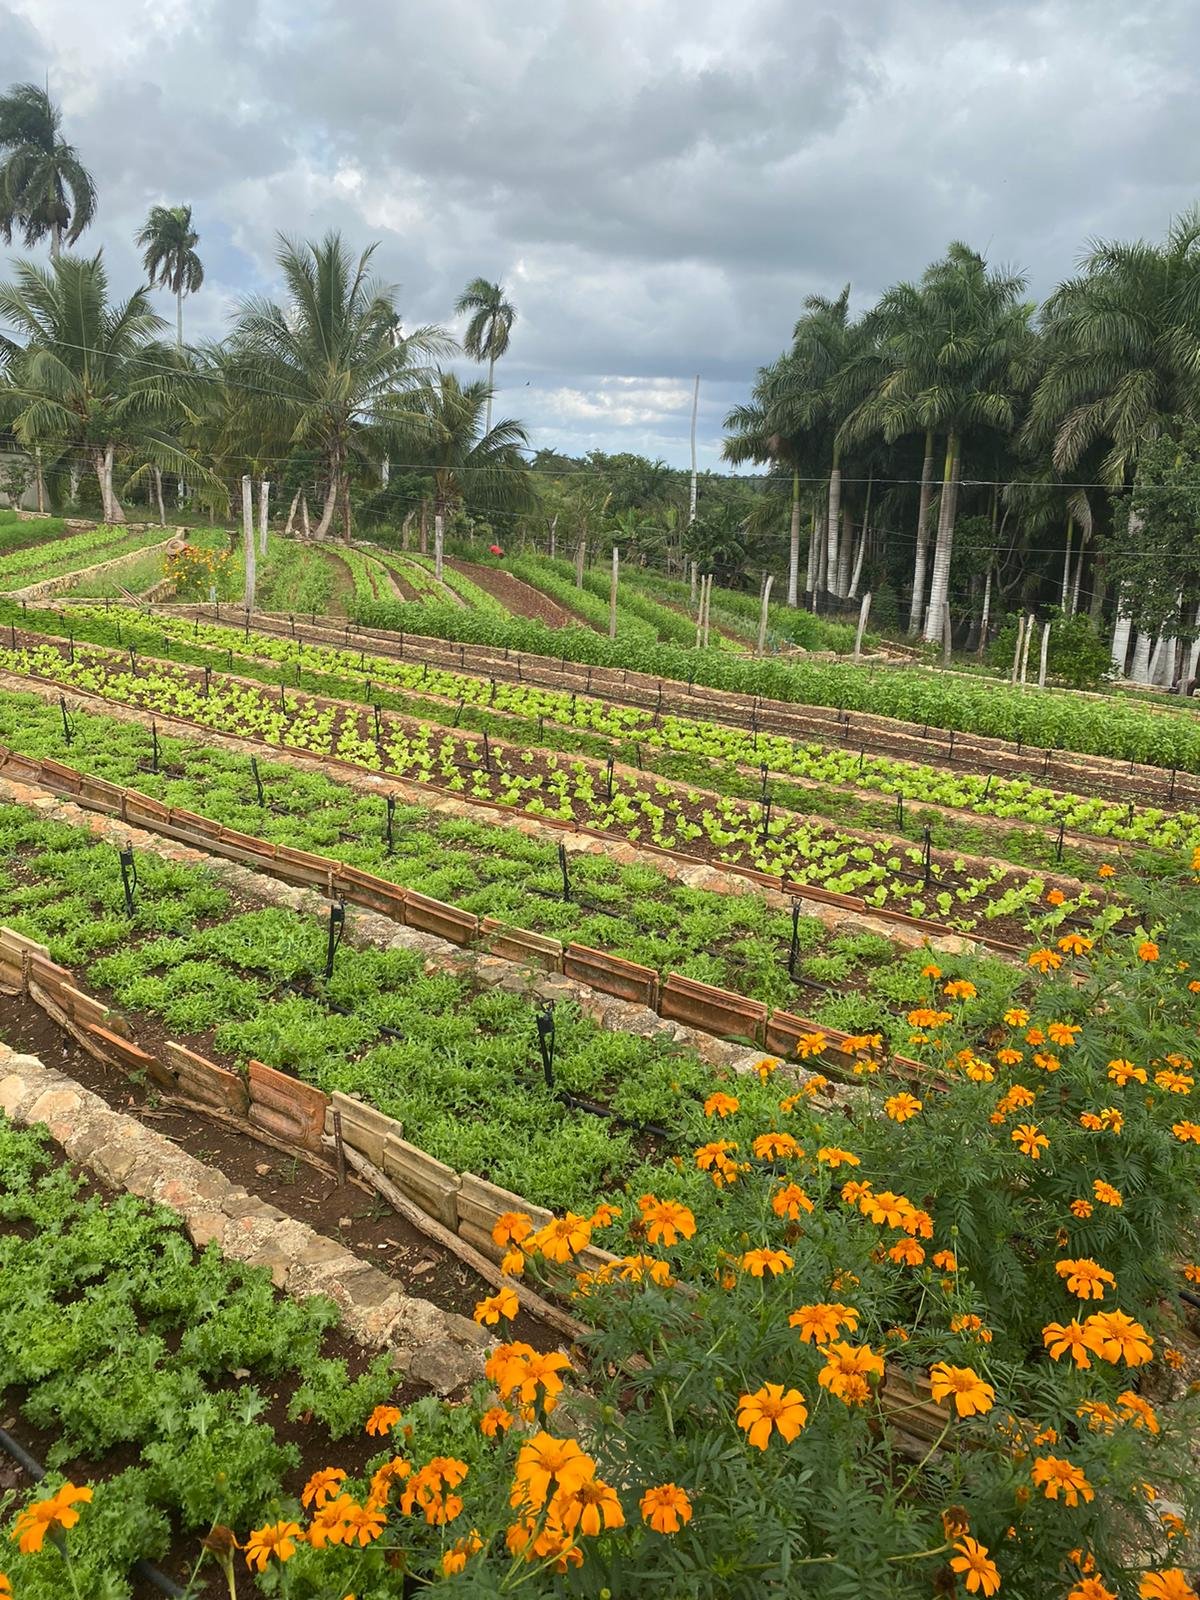 Farm with raised beds in Cuba - January 2022